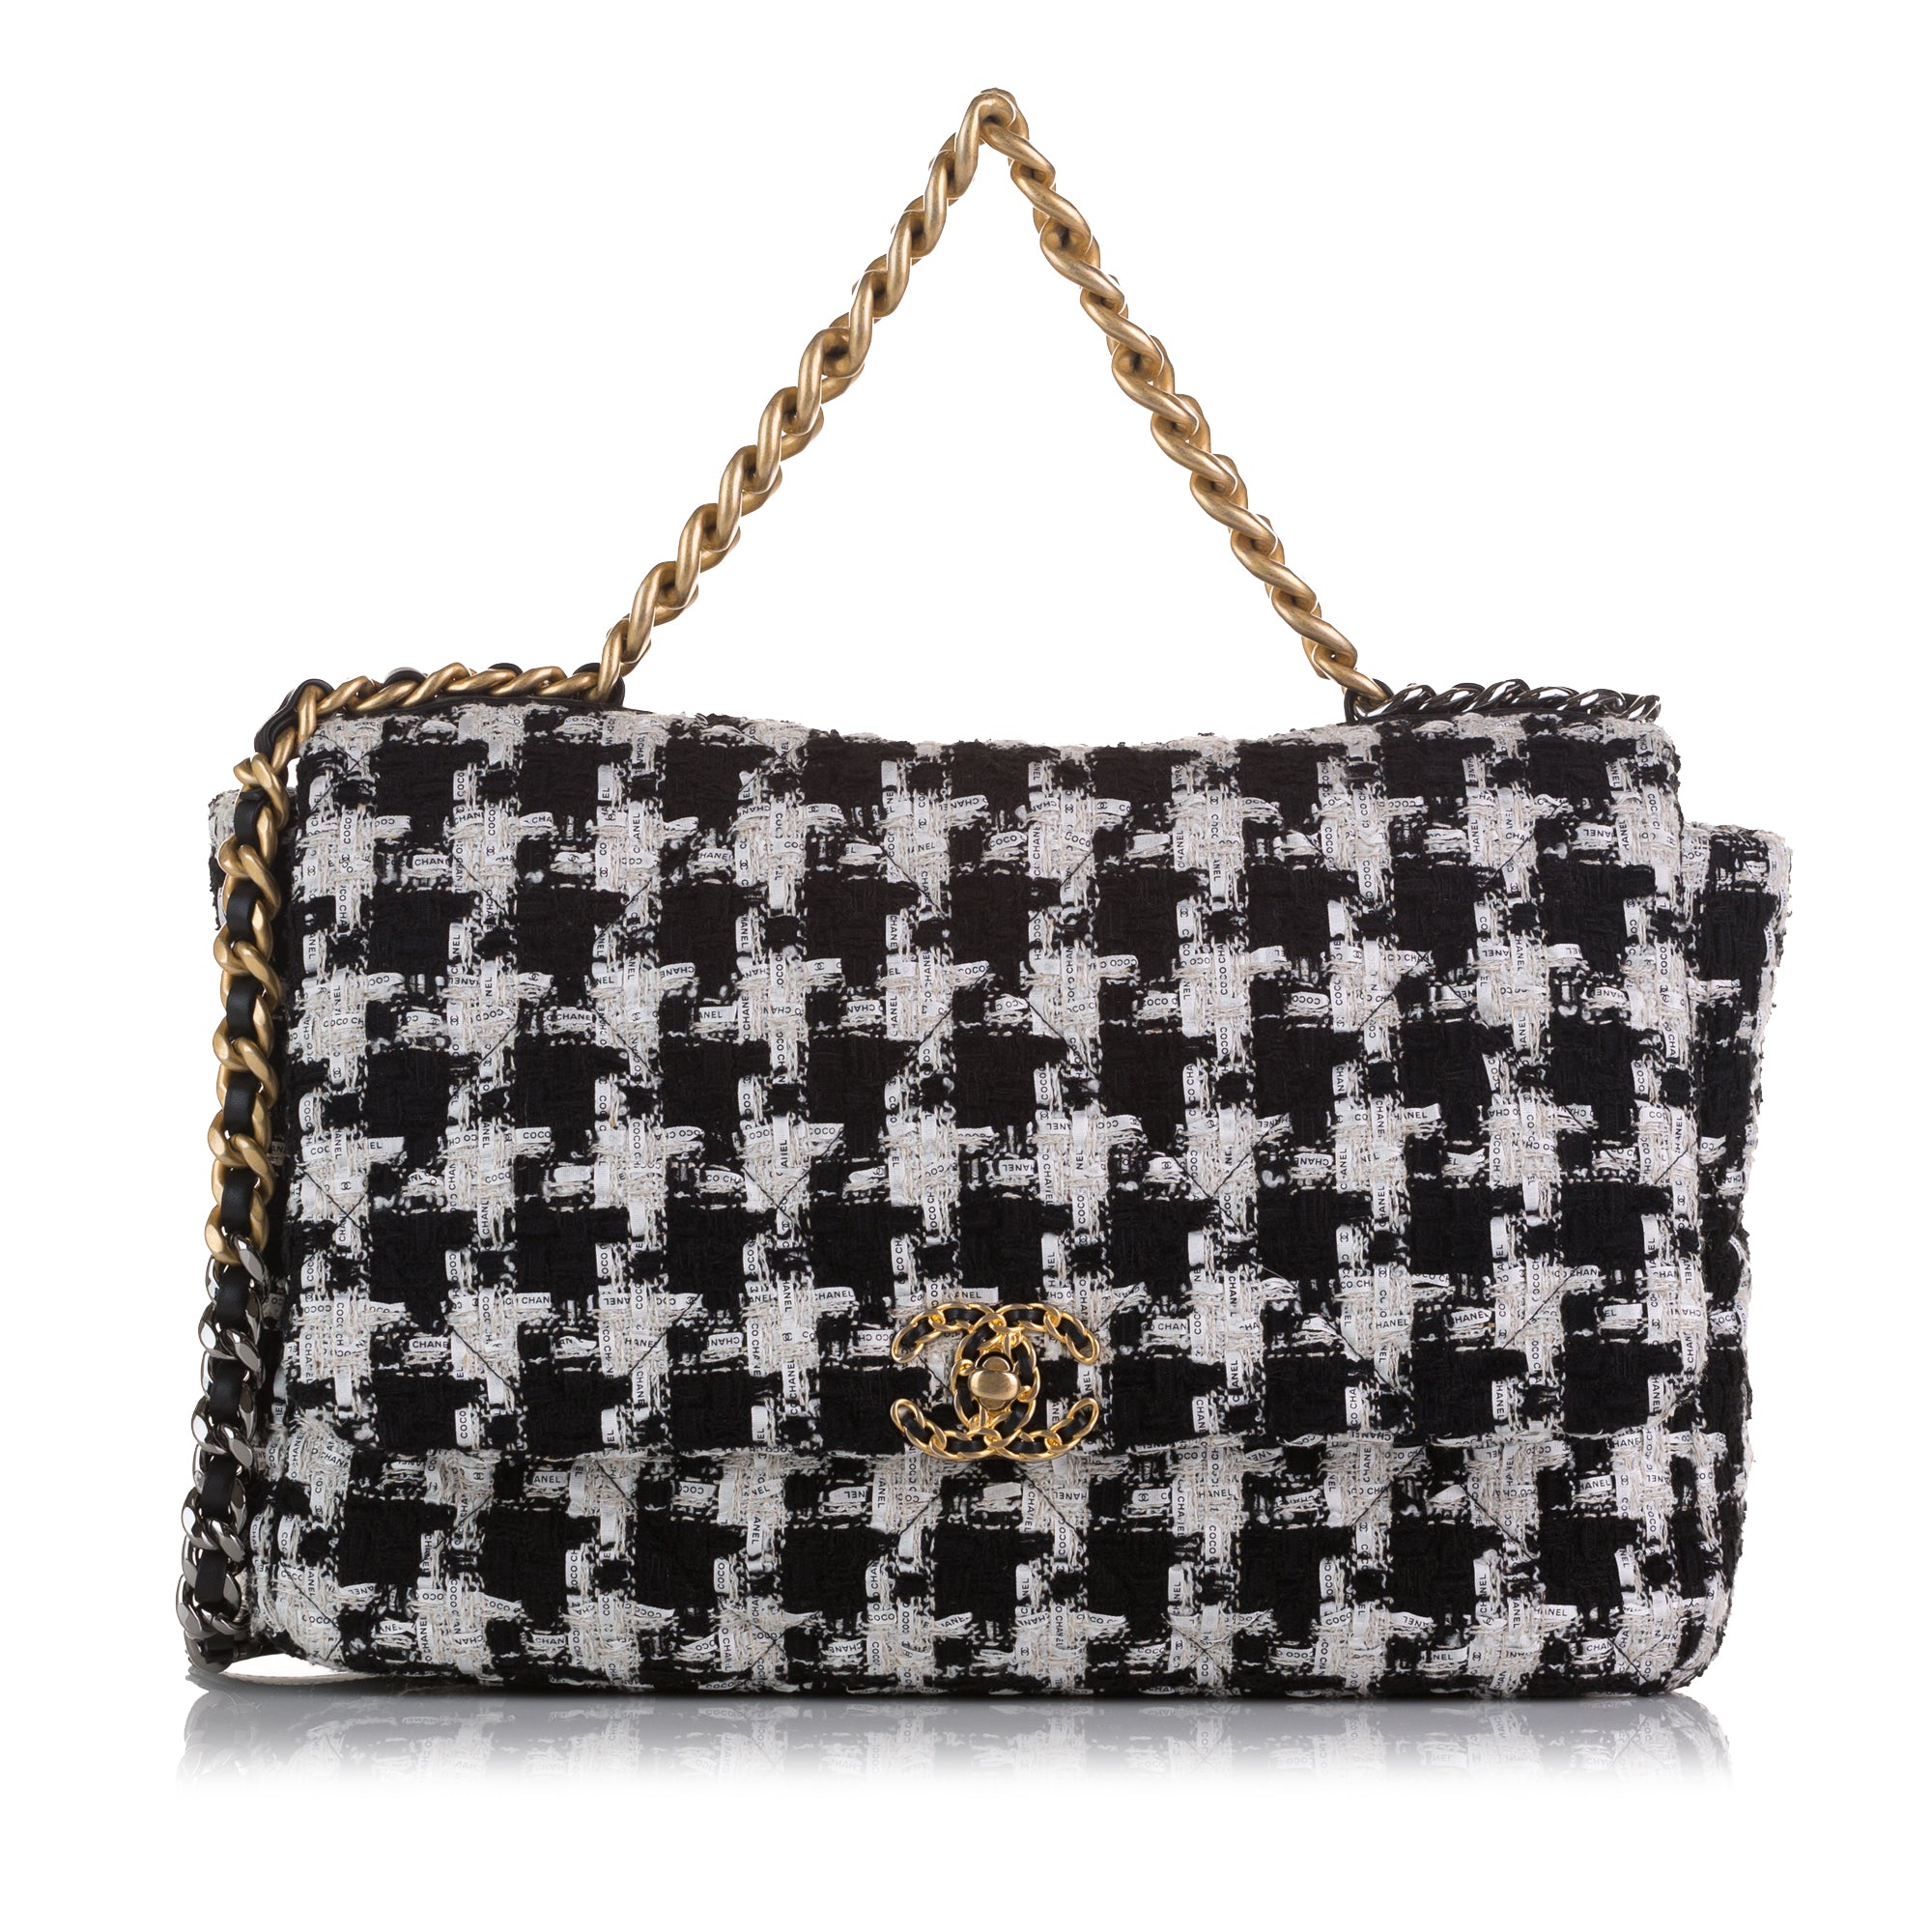 Only 2318.00 usd for CHANEL 19 Small Flap Bag in Black White